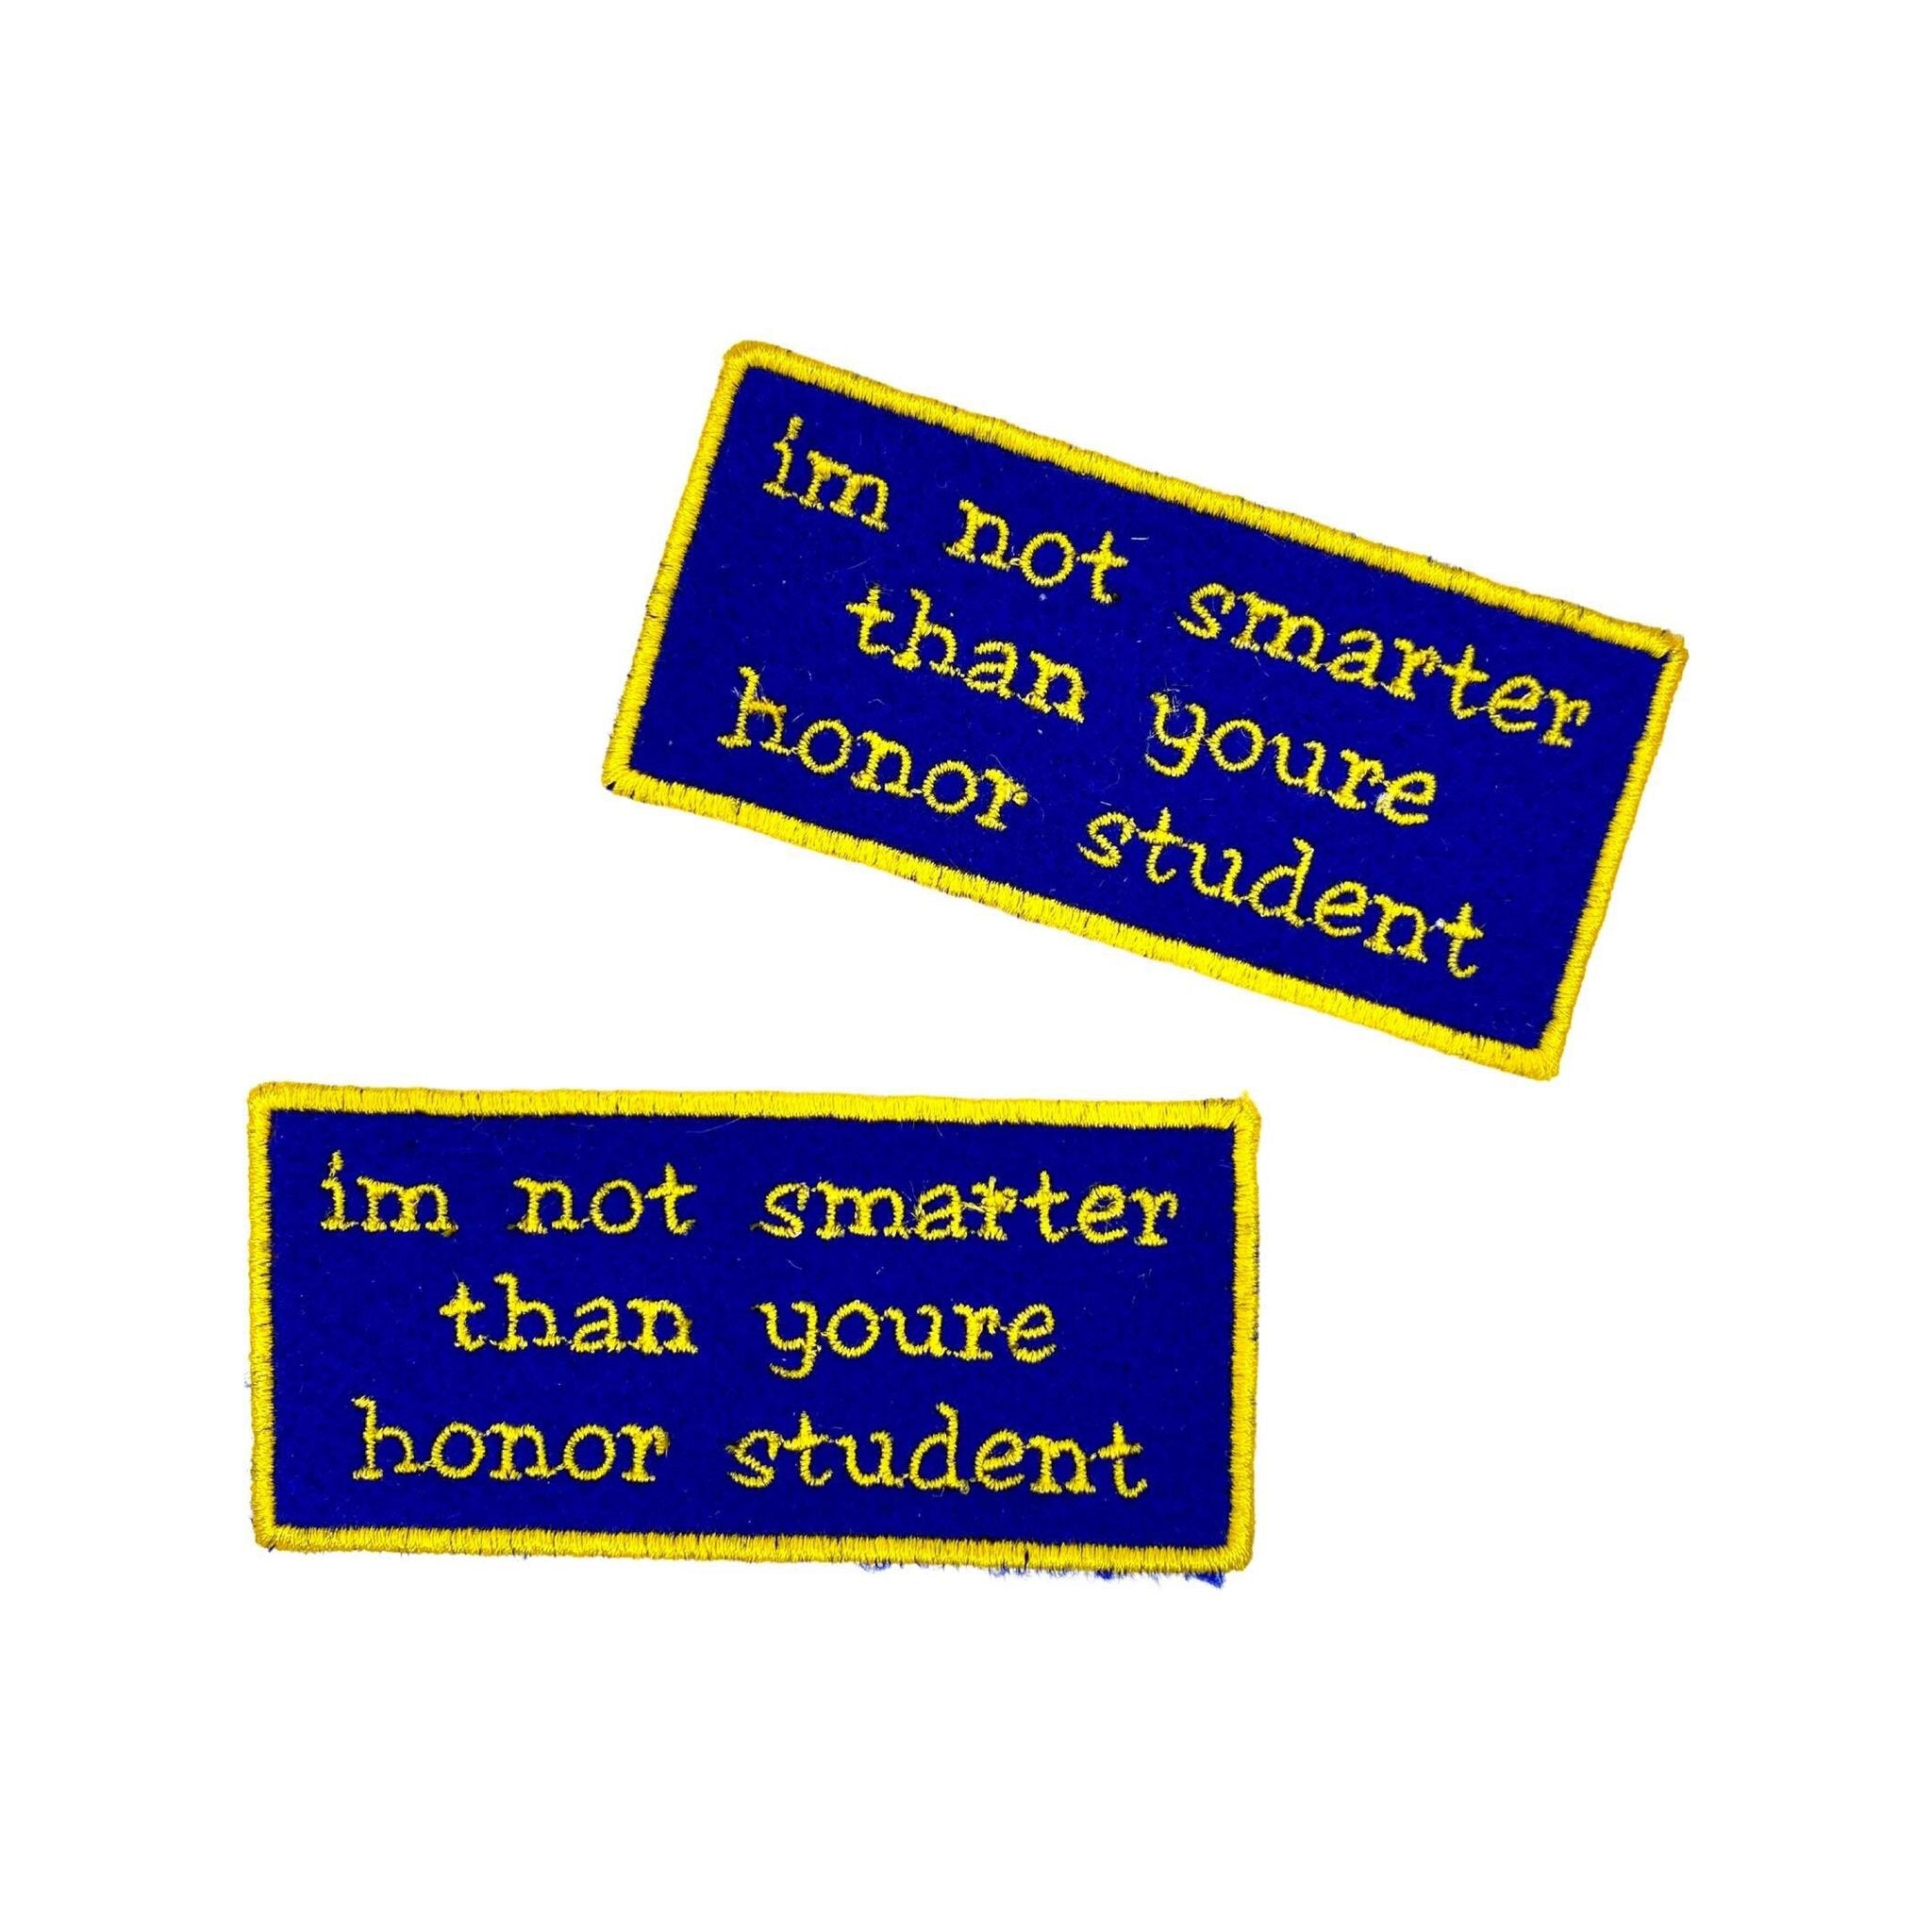 I'm Not Smarter Than Youre Honor Student Embroidered Iron-on Patch - IncredibleGood Inc